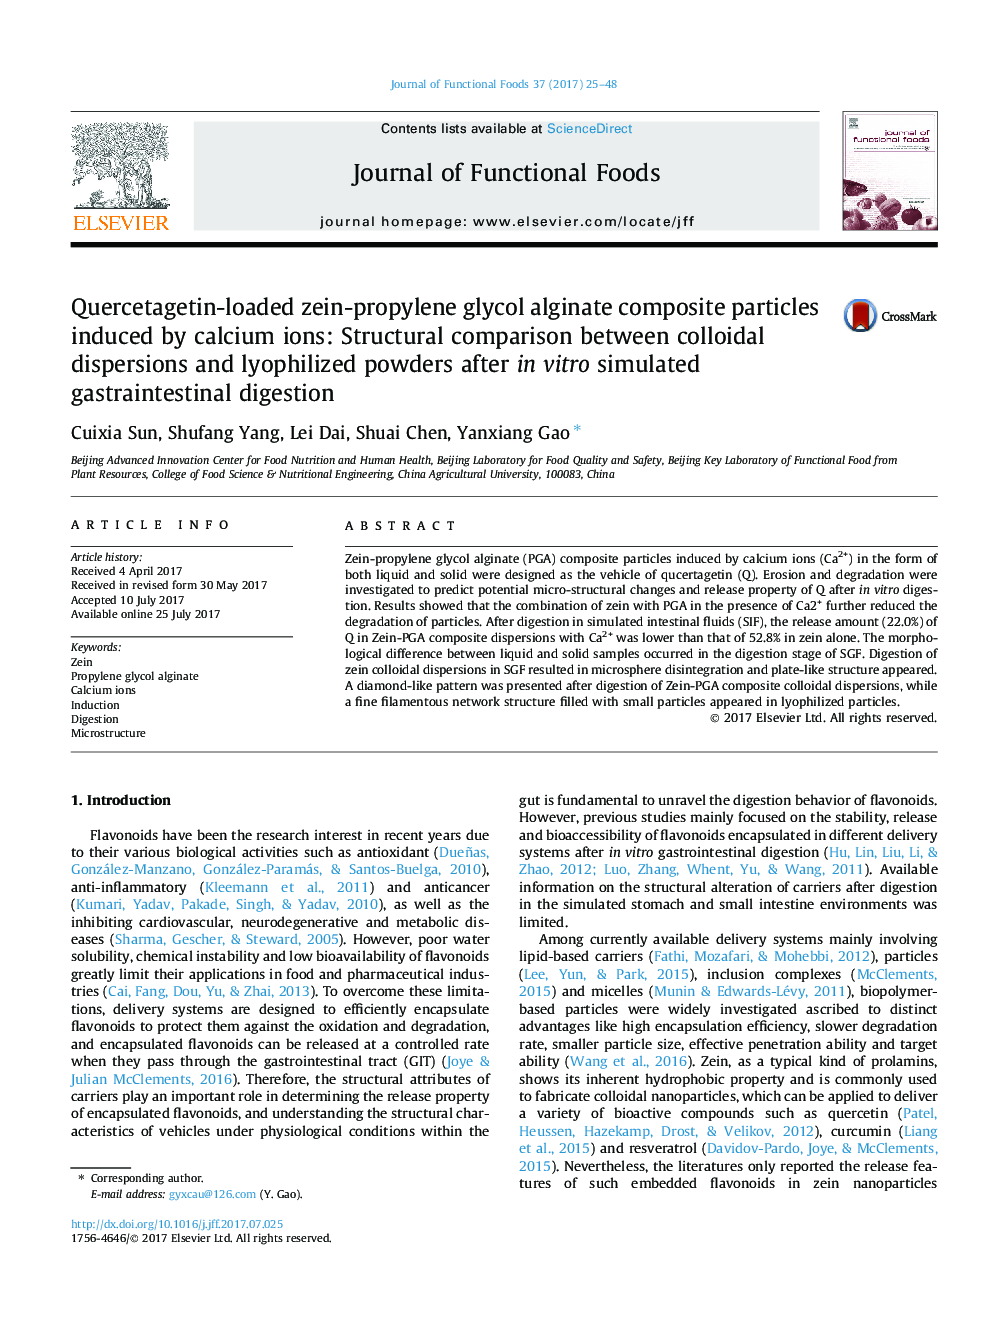 Quercetagetin-loaded zein-propylene glycol alginate composite particles induced by calcium ions: Structural comparison between colloidal dispersions and lyophilized powders after in vitro simulated gastraintestinal digestion